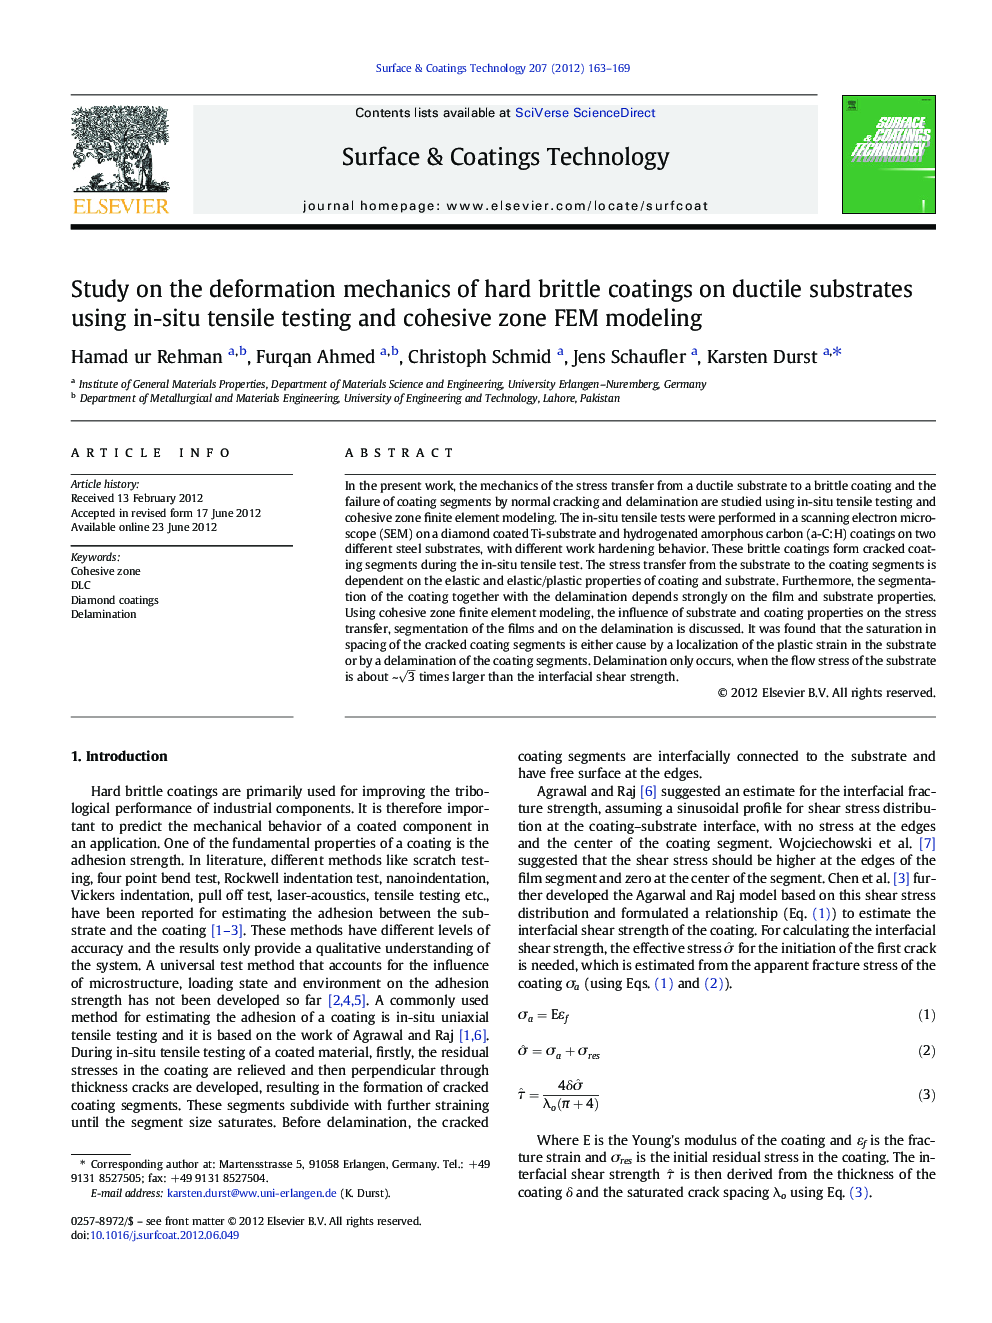 Study on the deformation mechanics of hard brittle coatings on ductile substrates using in-situ tensile testing and cohesive zone FEM modeling